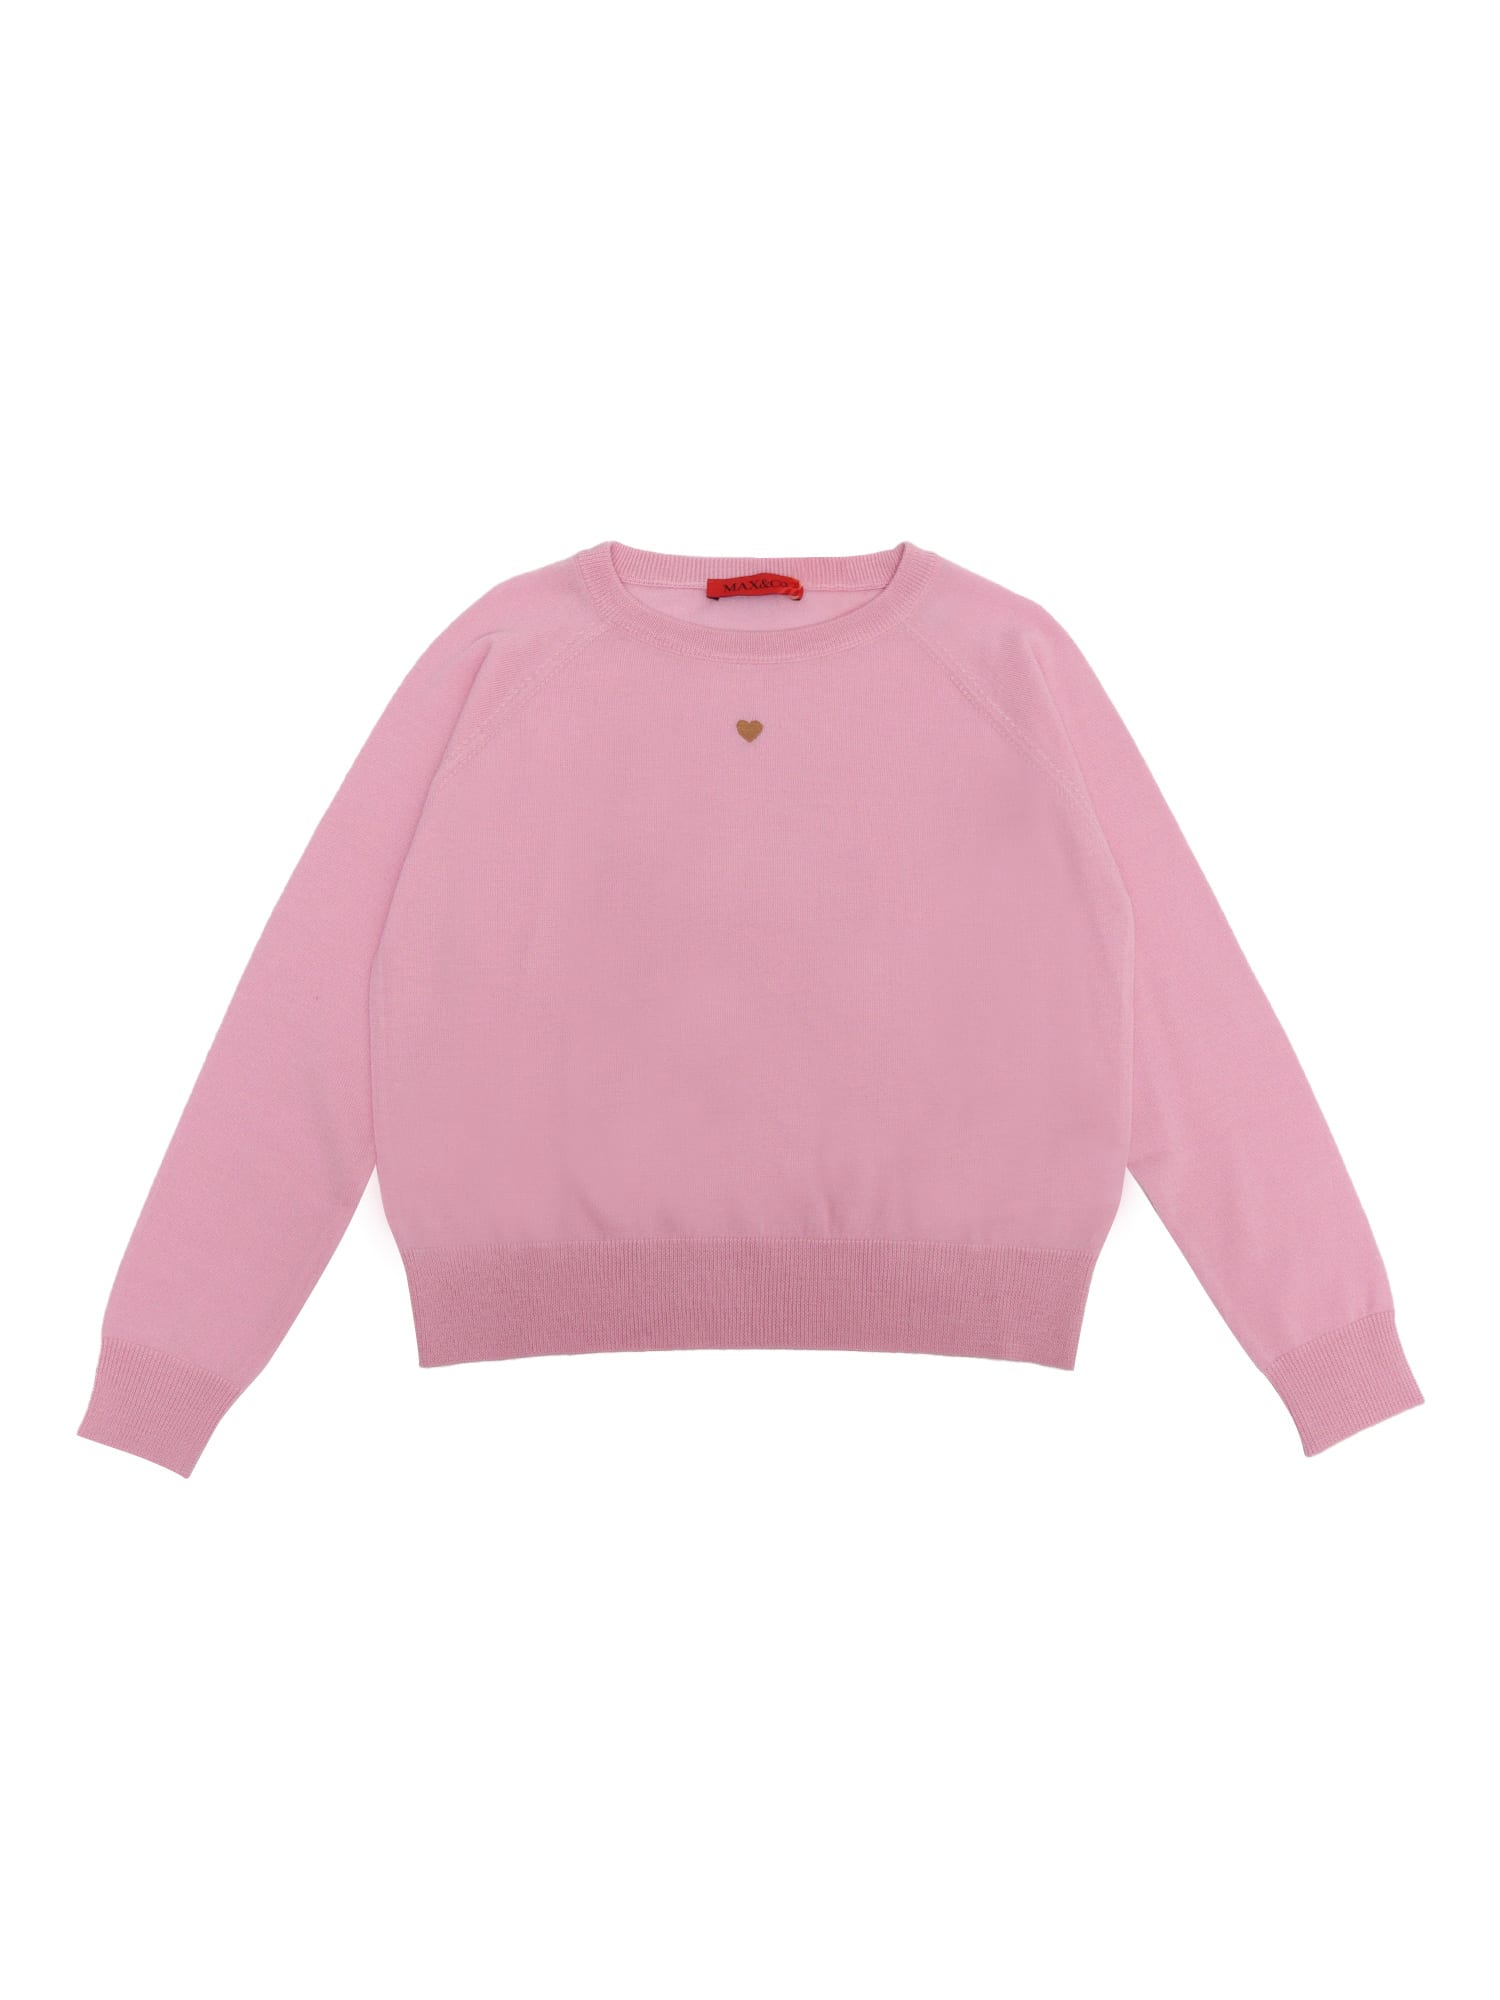 Max&amp;co. Kids' Pink Sweater In Purple